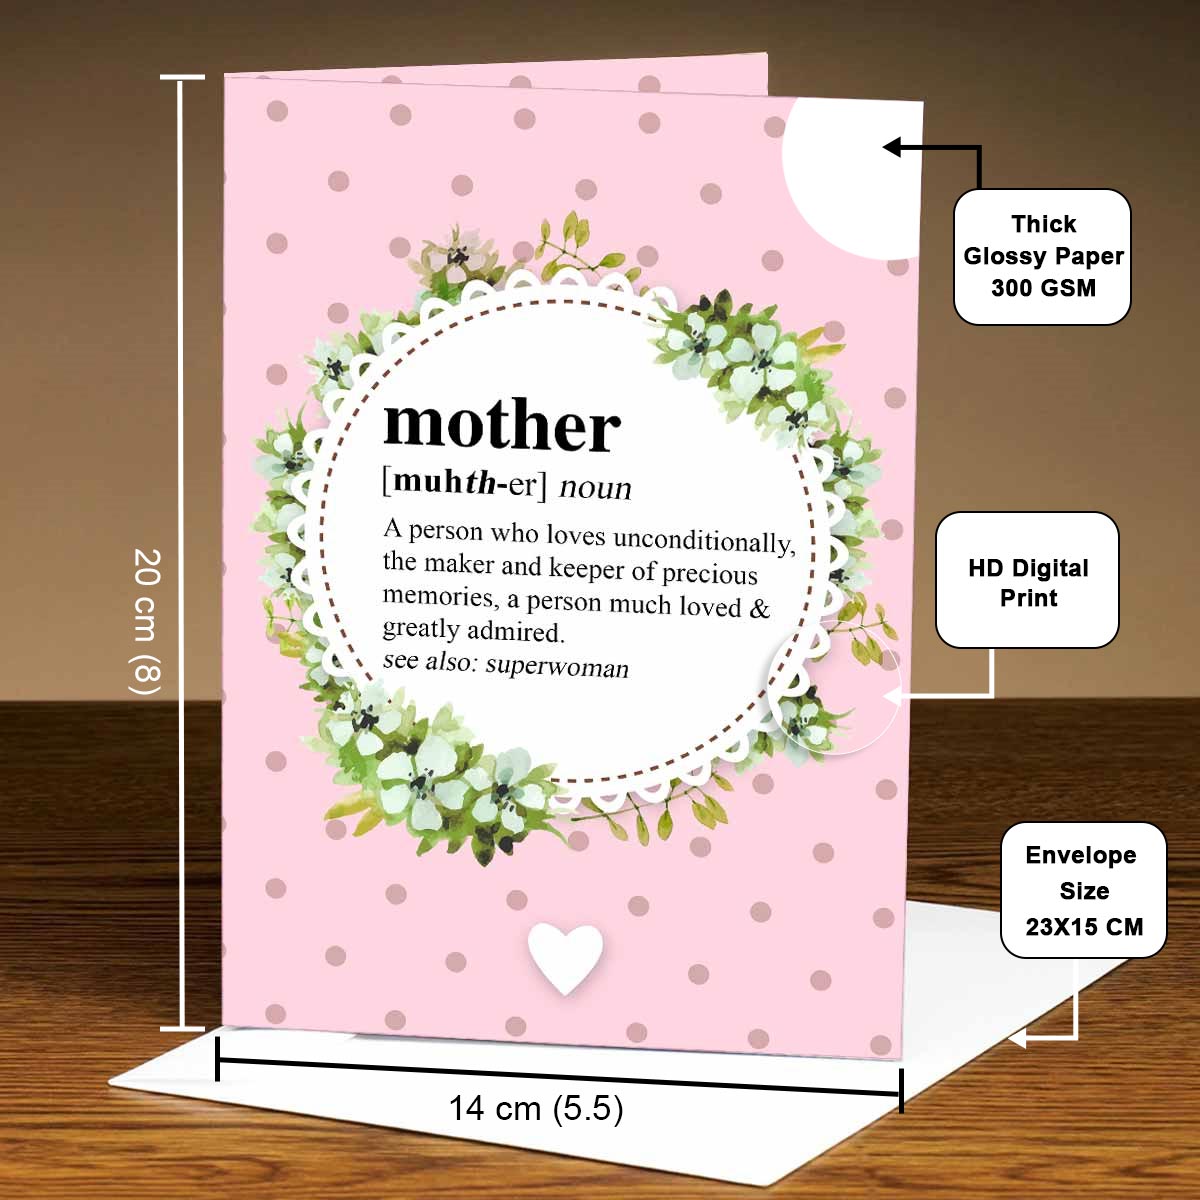 Personalised Best Mother Mirror Card